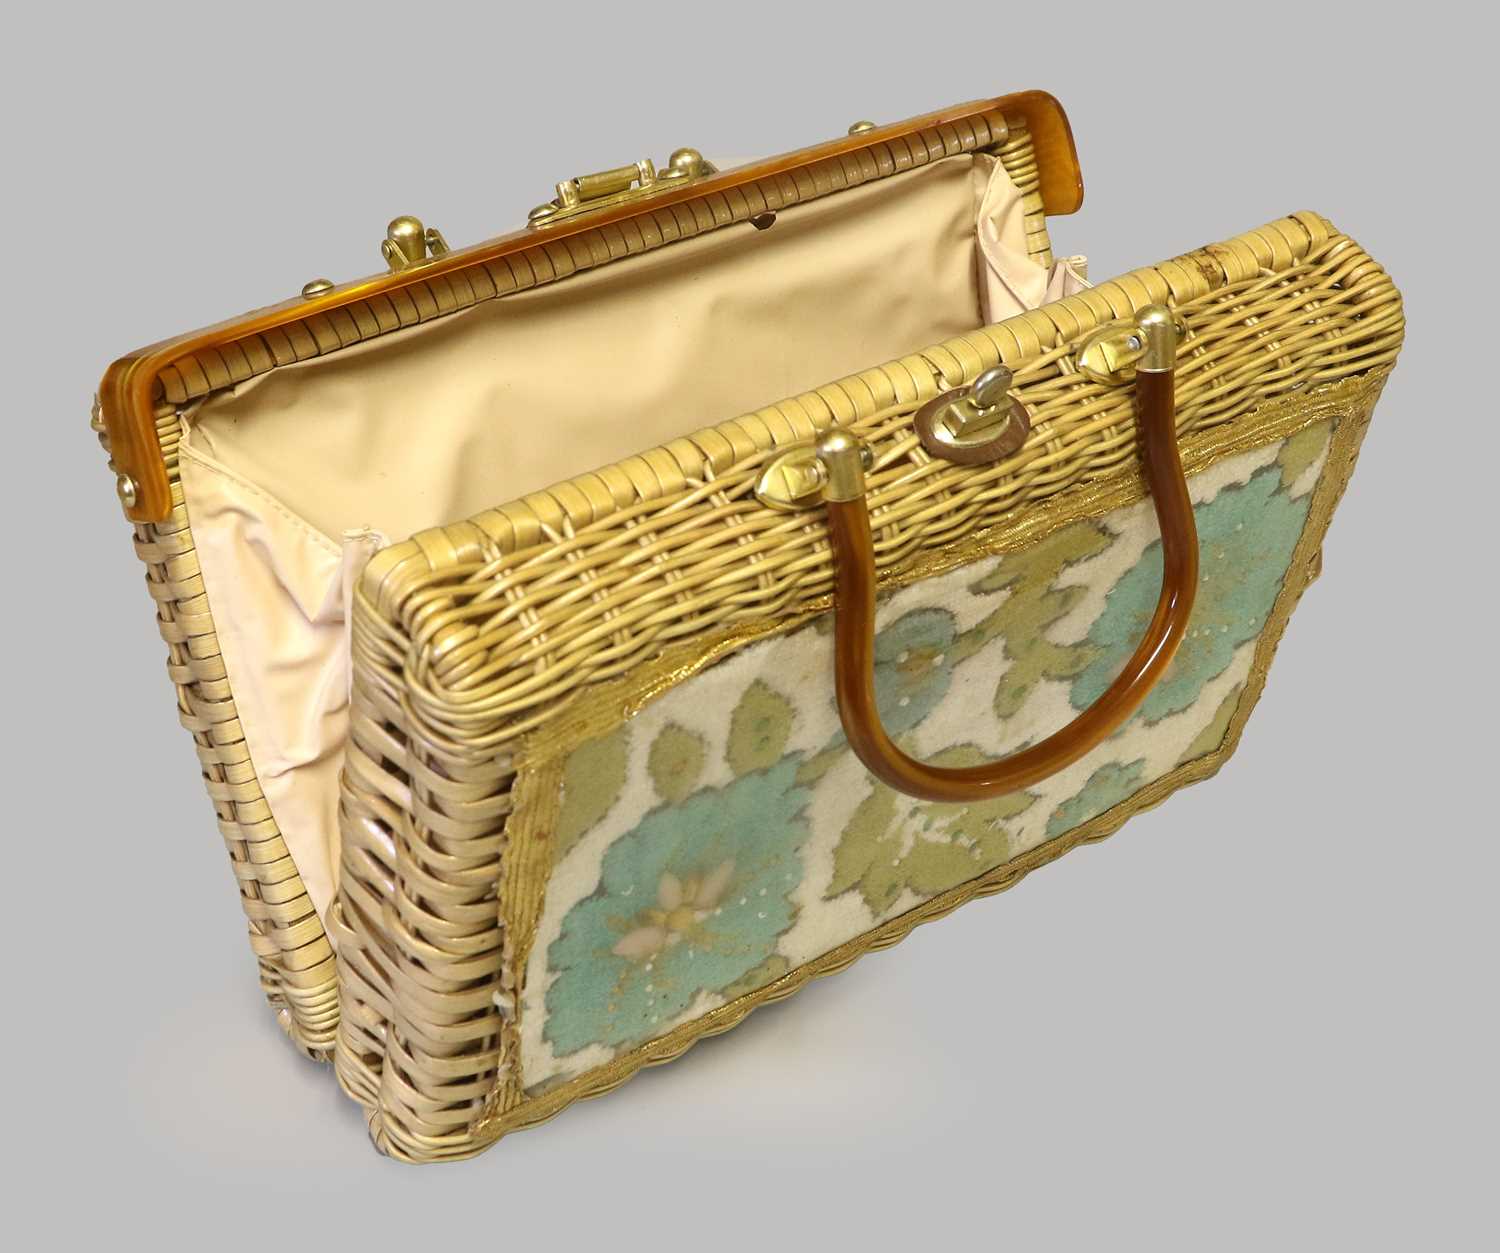 Circa 1950/60s Princess Charming by Atlas, Hollywood Lucite and Basket Weave Handbag, with a green - Image 2 of 2